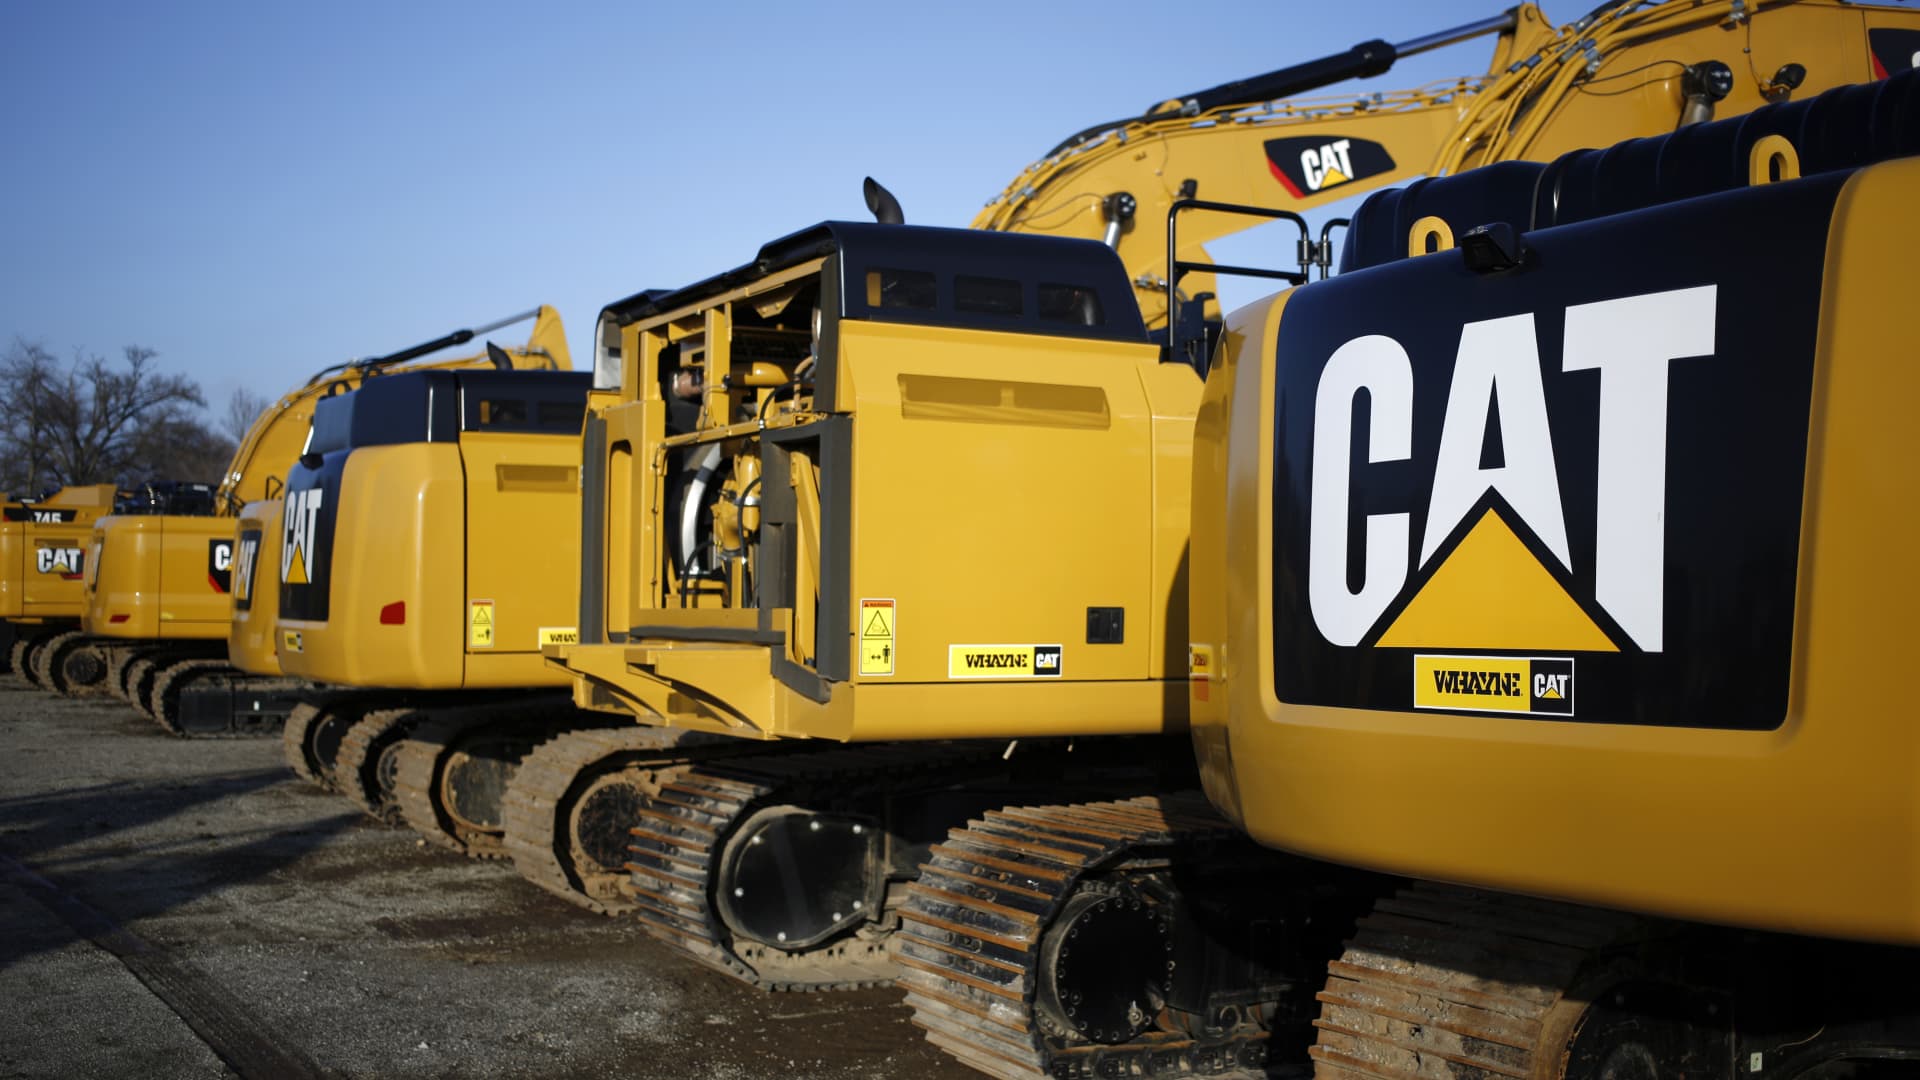 Caterpillar Inc. excavators are displayed for sale at the Whayne Supply Co. dealership in Louisville, Kentucky, U.S., on Monday, Jan. 27, 2020. Caterpillar is scheduled to release earnings figures on January 31.